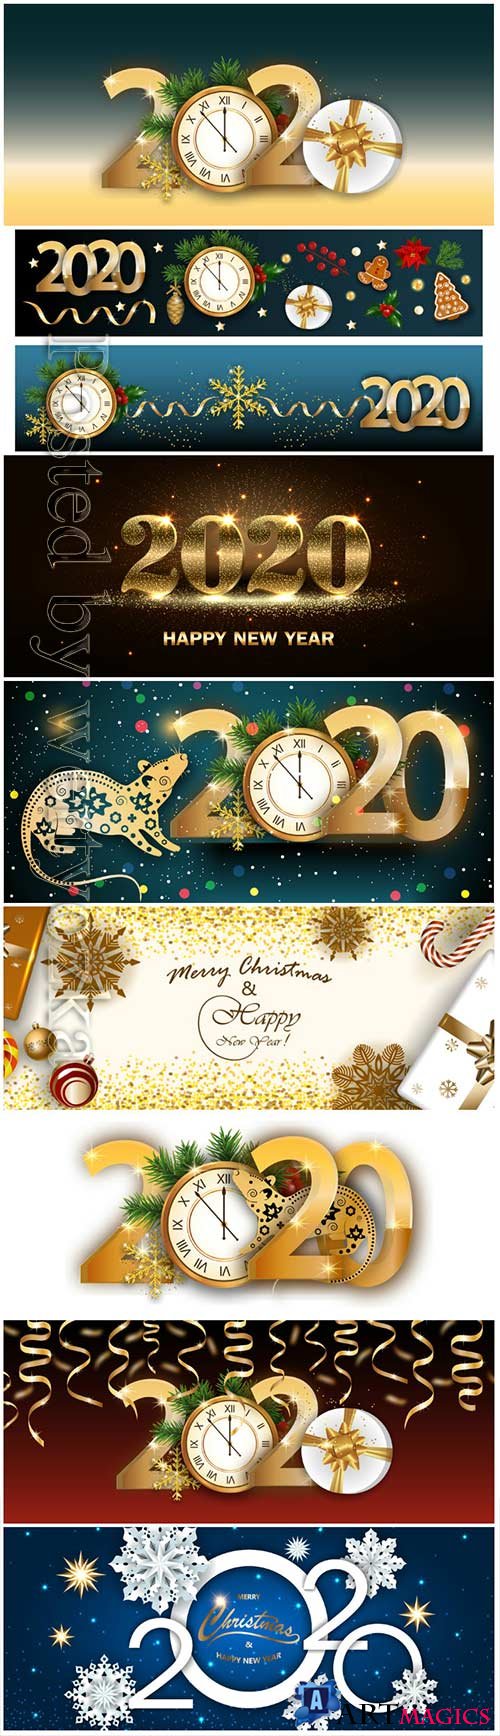 2020 Merry Chistmas and Happy New Year vector illustration # 12